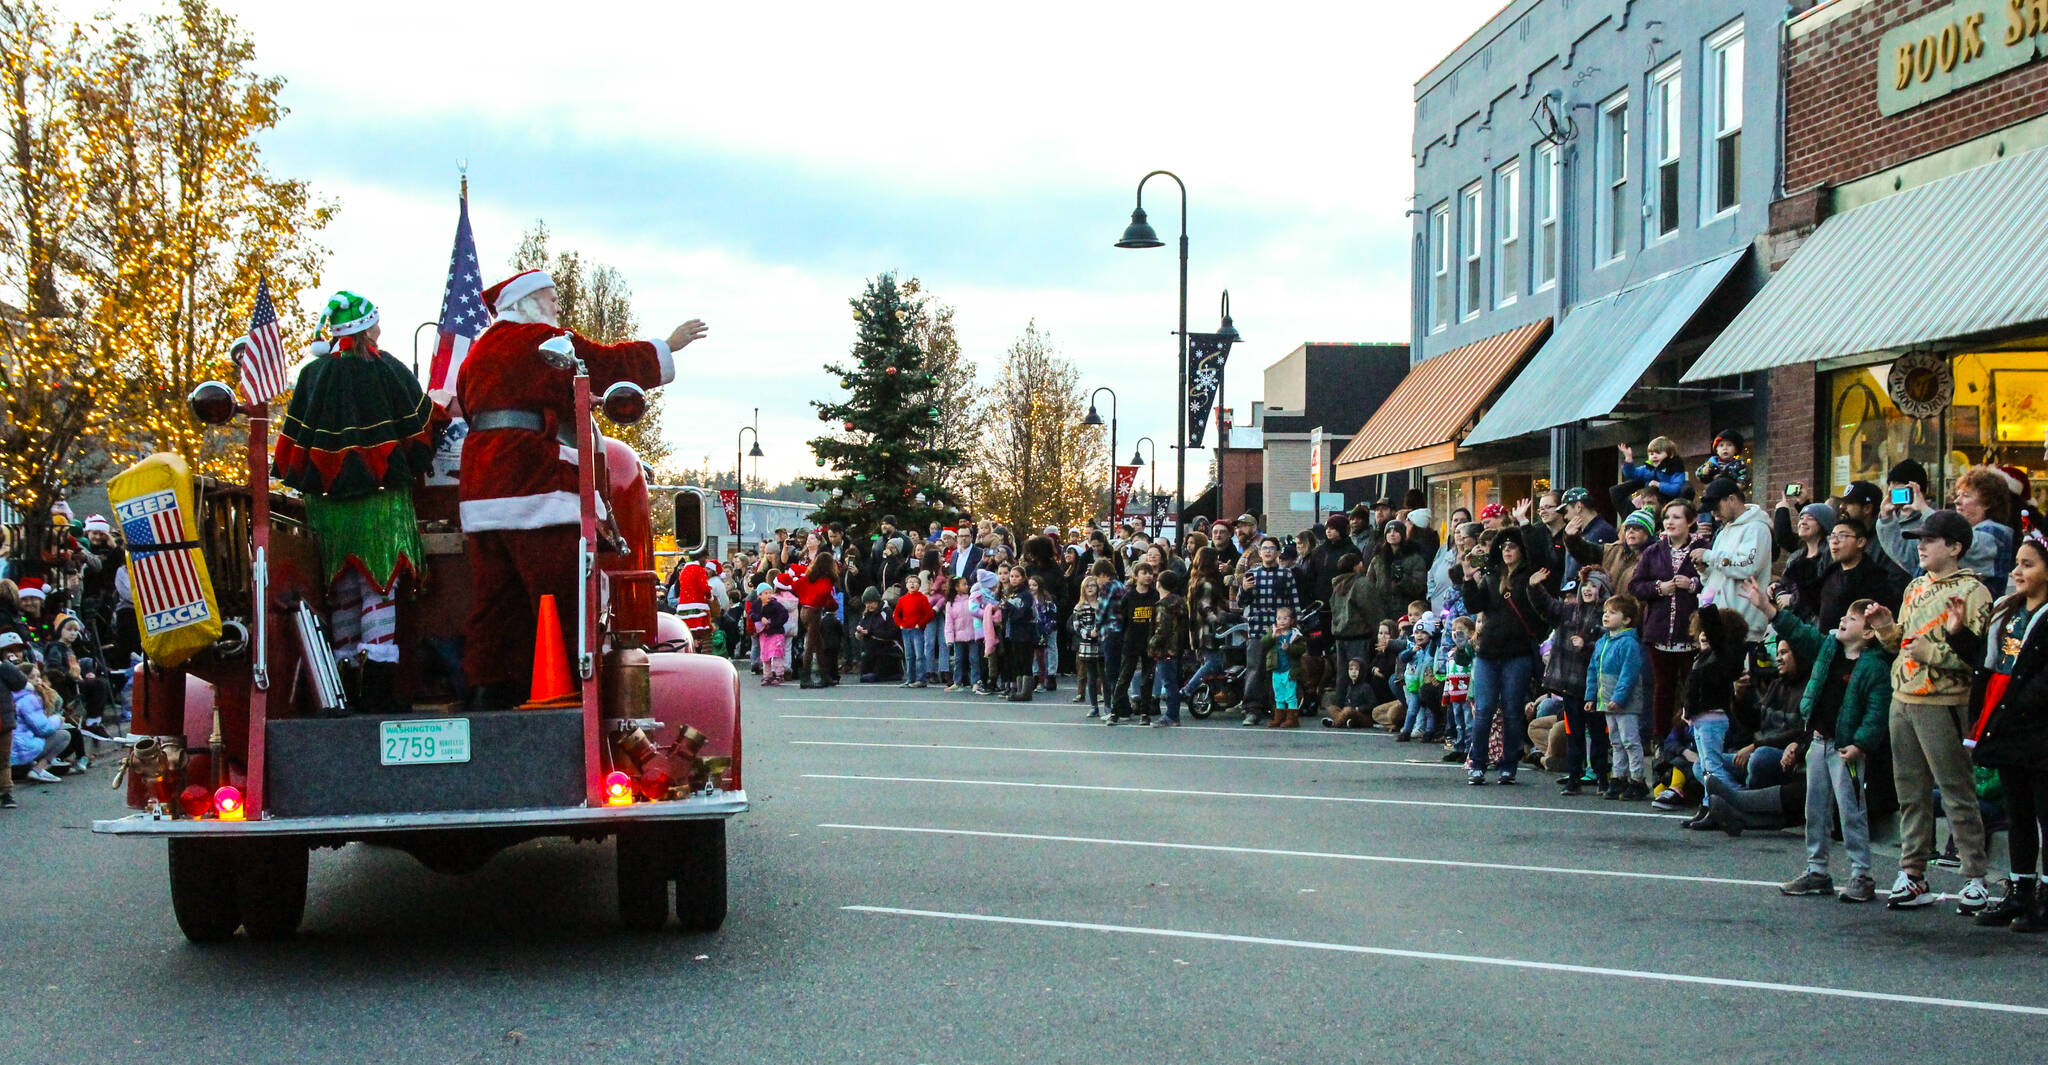 A large crowd cheered as Santa arrived at Dock & Pioneer on board of a shiny red truck. (Photo by Luisa Loi)